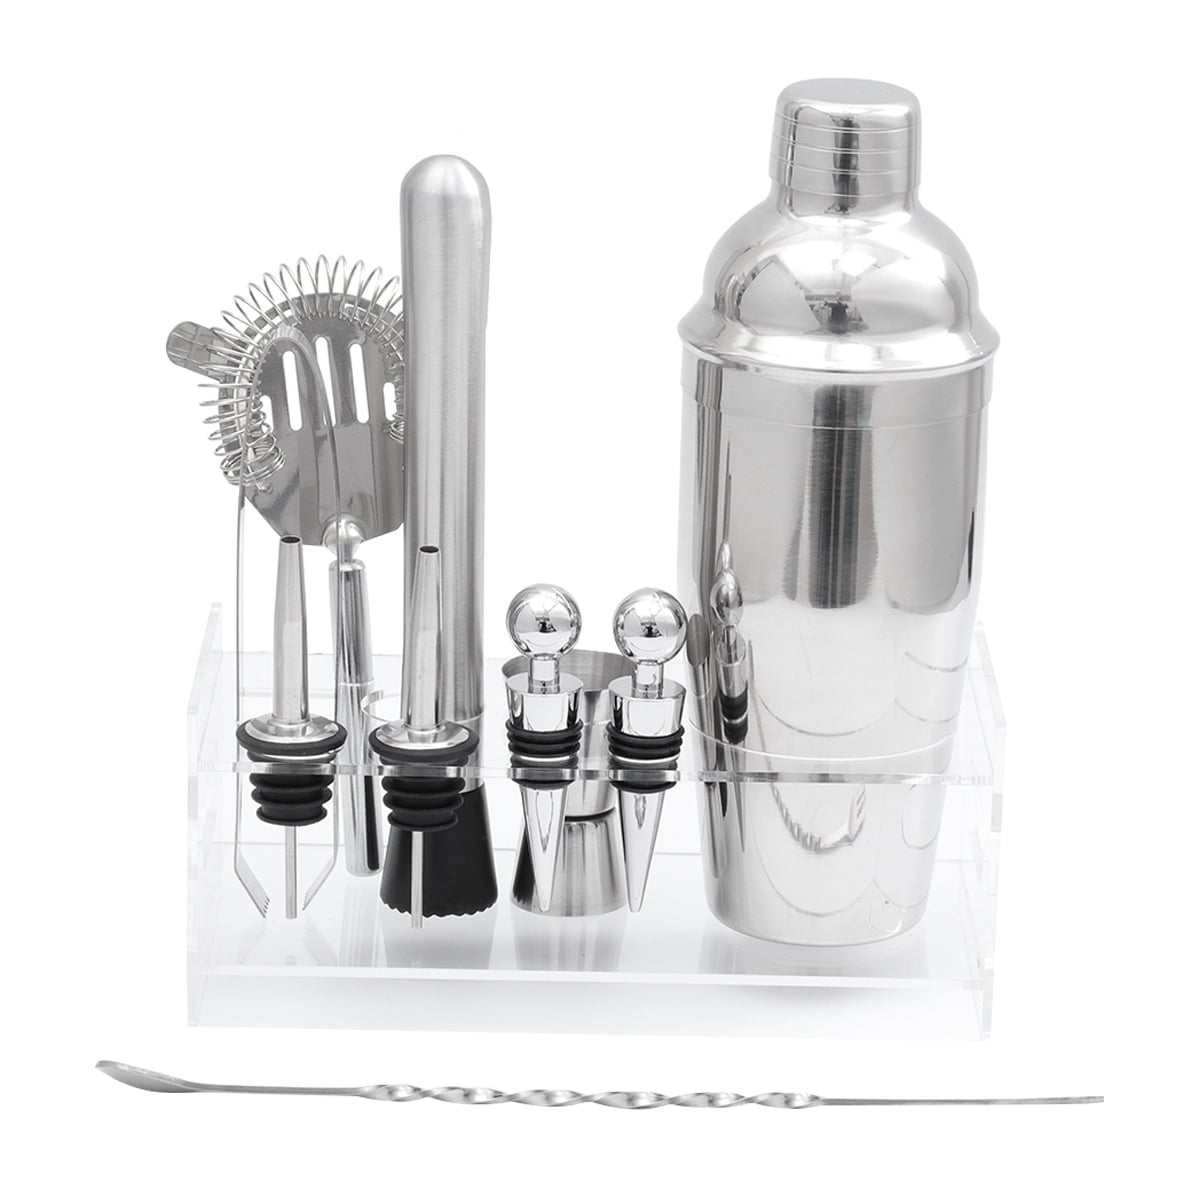 10PCS Cocktail Shaker Set Bar Accessories Kit Stainless Steel Bartender Tools 